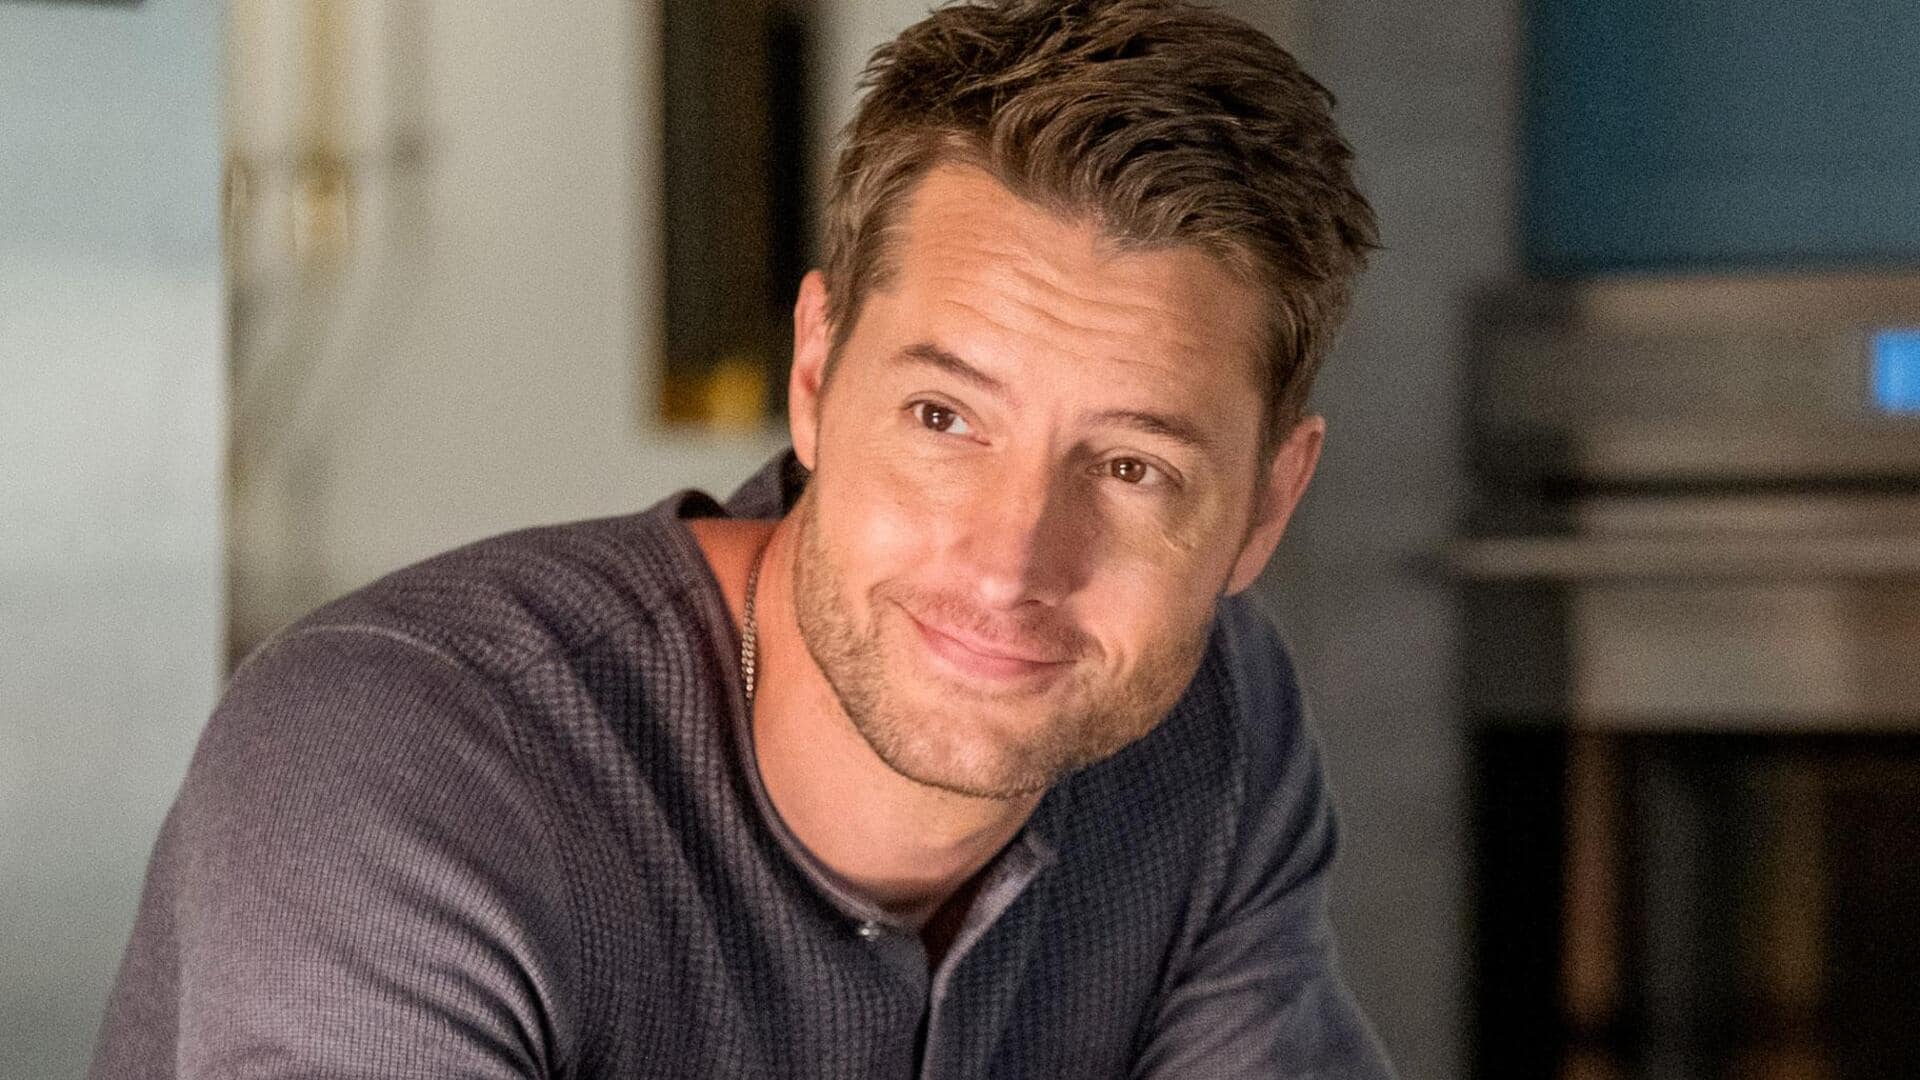 'Gemini Division' to 'The Noel Diary': Justin Hartley's notable projects 